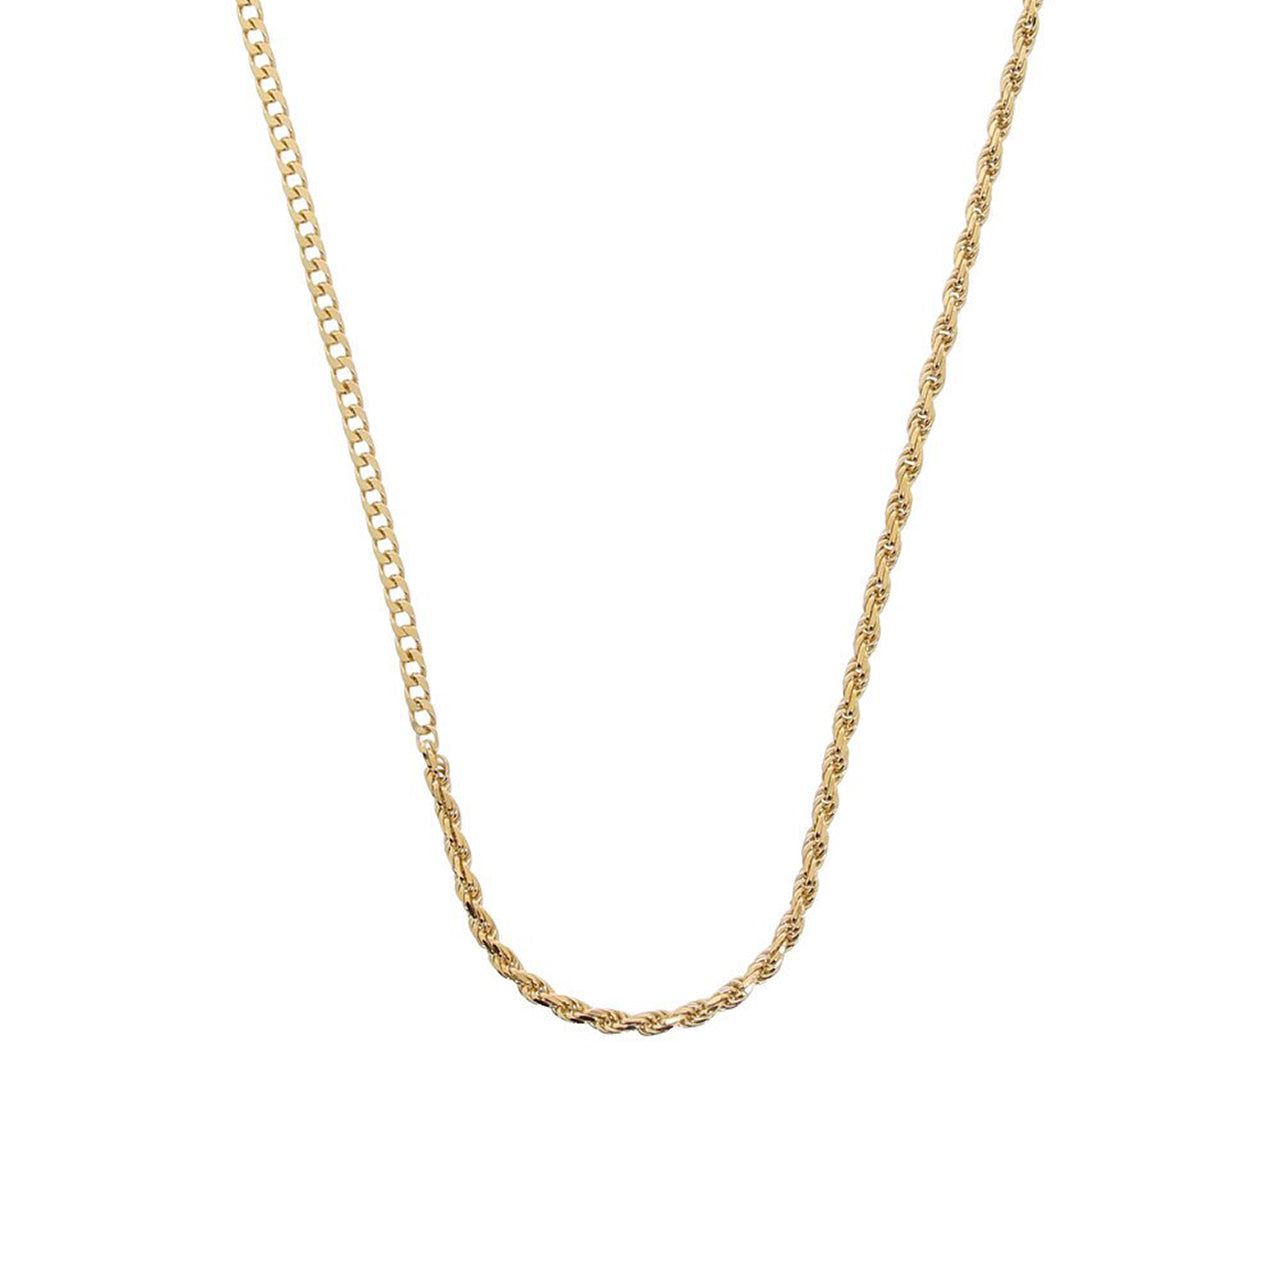 REFLECTION CHAIN NECKLACE (STERLING SILVER) – KIRSTIN ASH (United States)